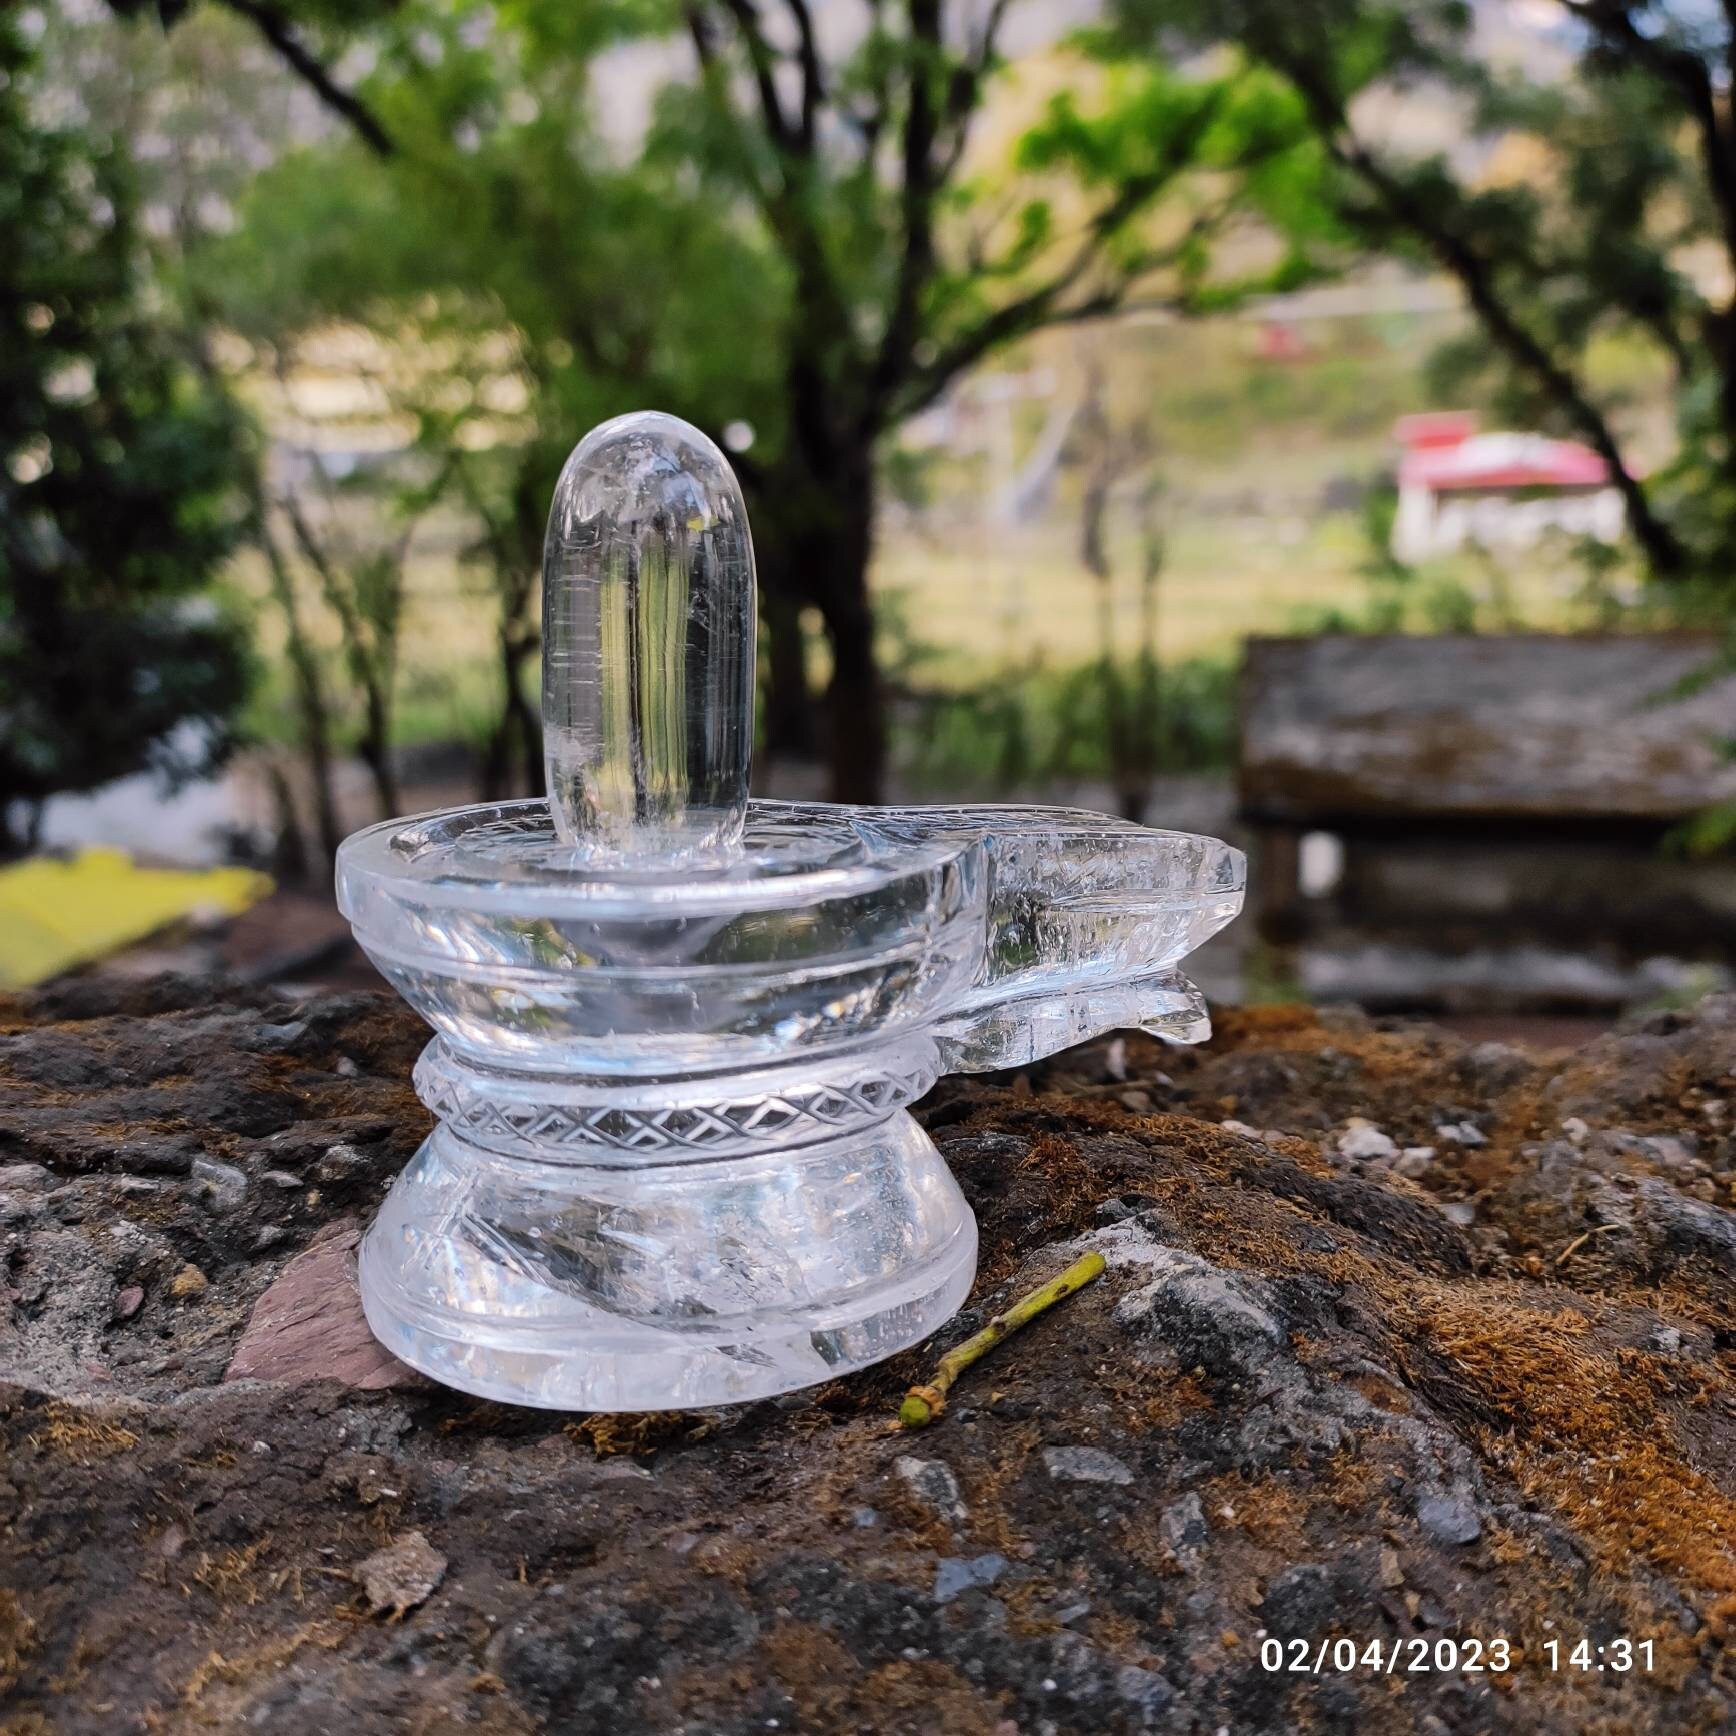 Shivling Photo | 829+ Shivling DP for Whatsapp, FB, & Instagram Profile Pics  2023 - [485+] Mood off DP, Images, Photos, Pics, Download (2023)